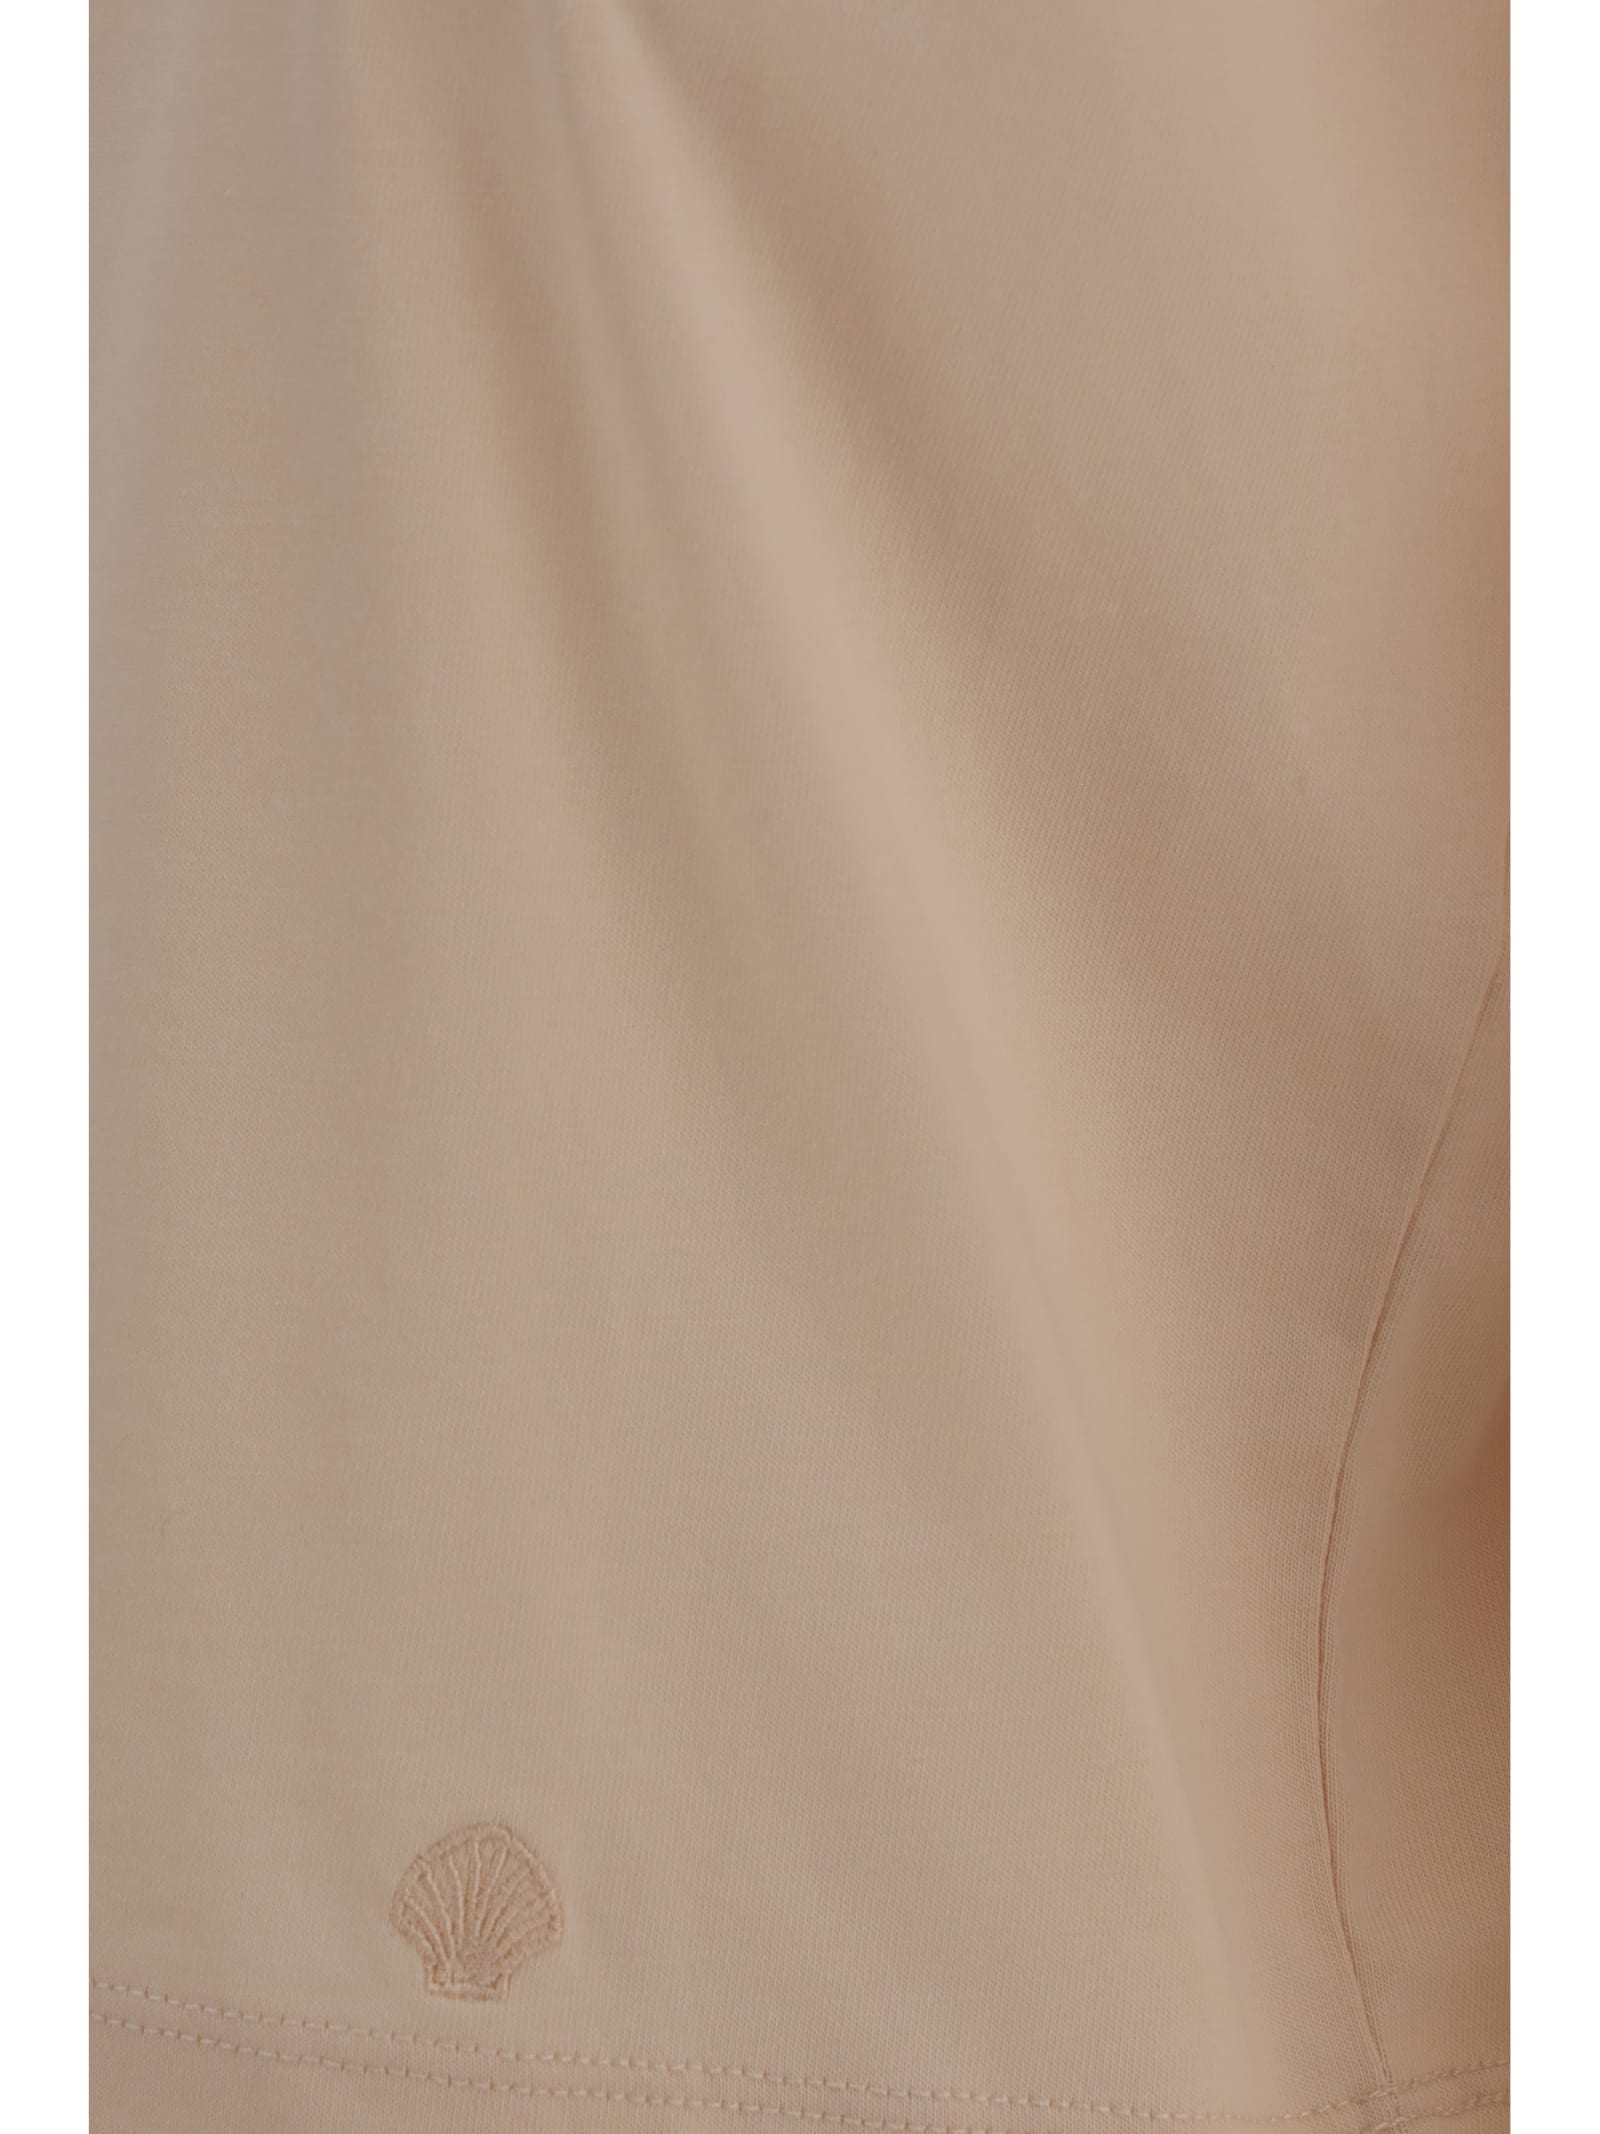 Shop Loulou Studio Long Sleeve Jersey In Cream Rose